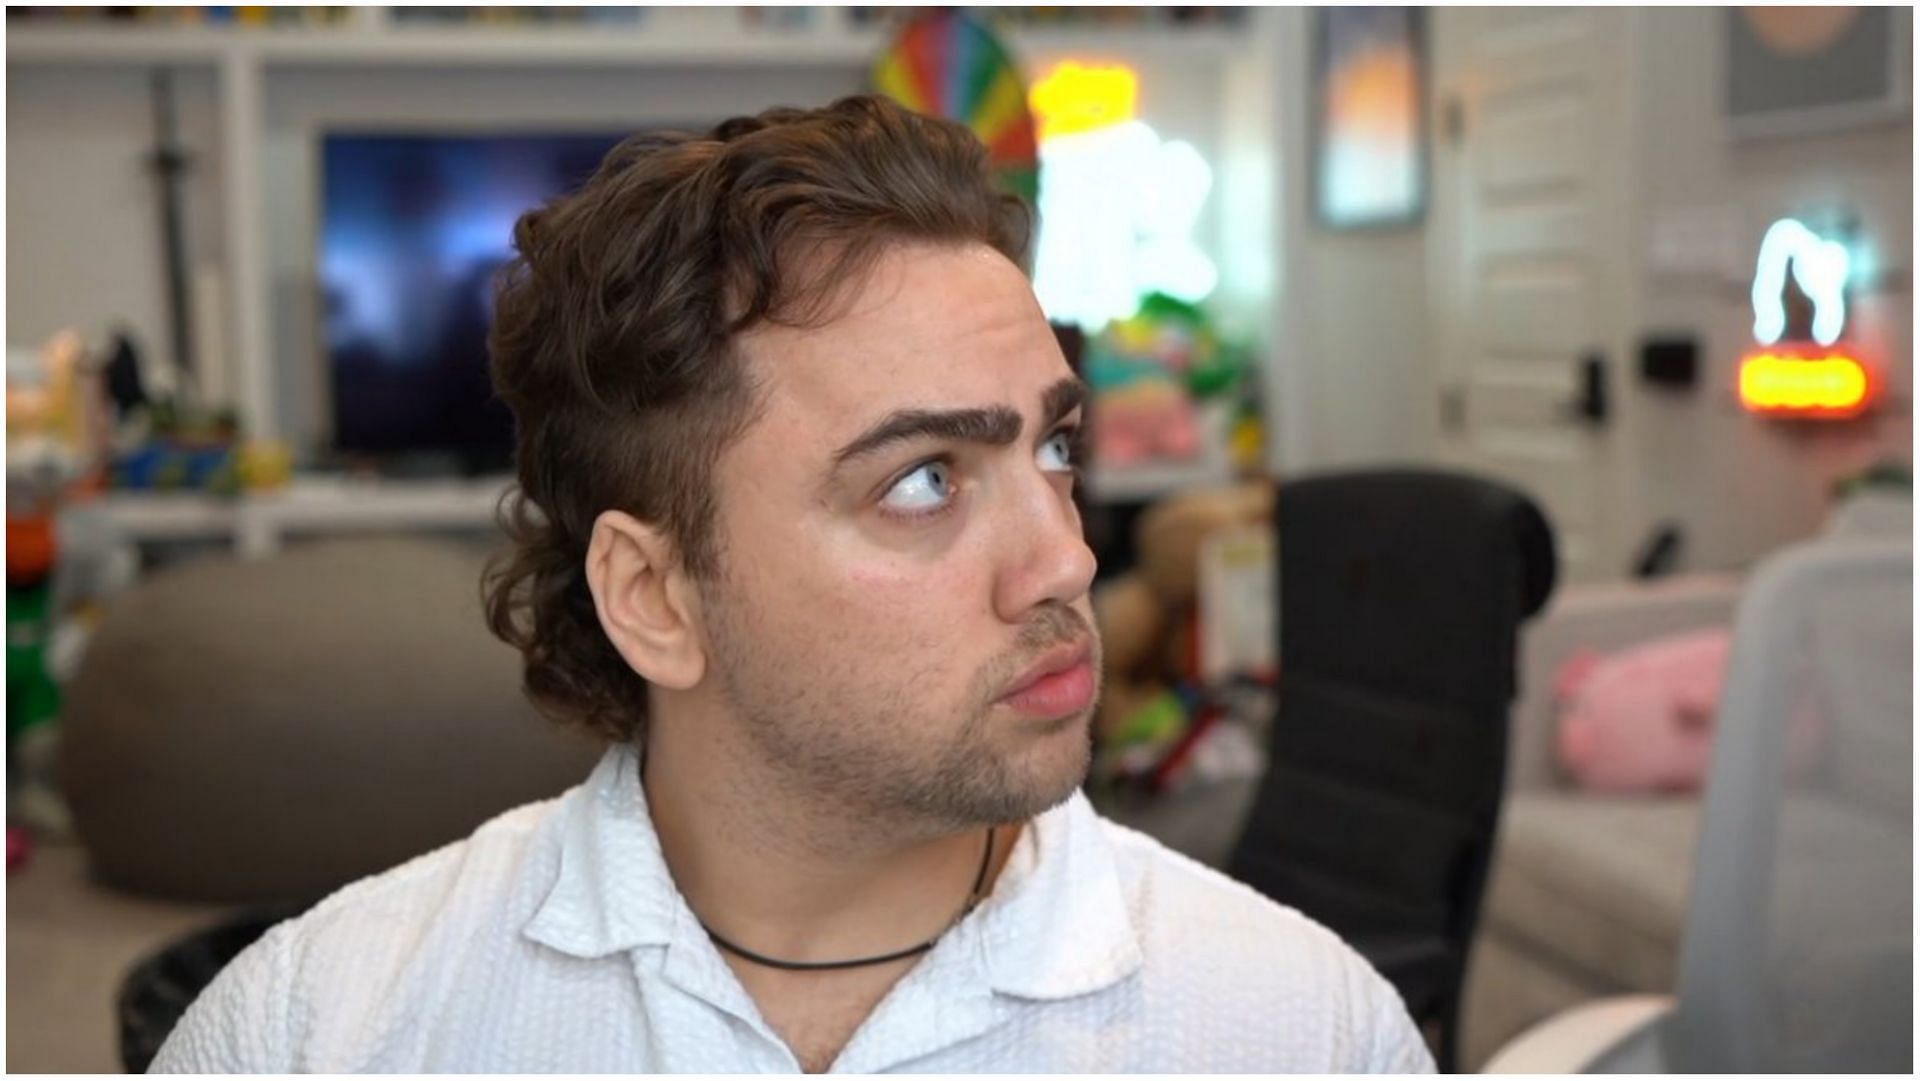 OTK has placed co-founder Mizkif on leave as a third party investigates allegations made against him (Image via Twitter)